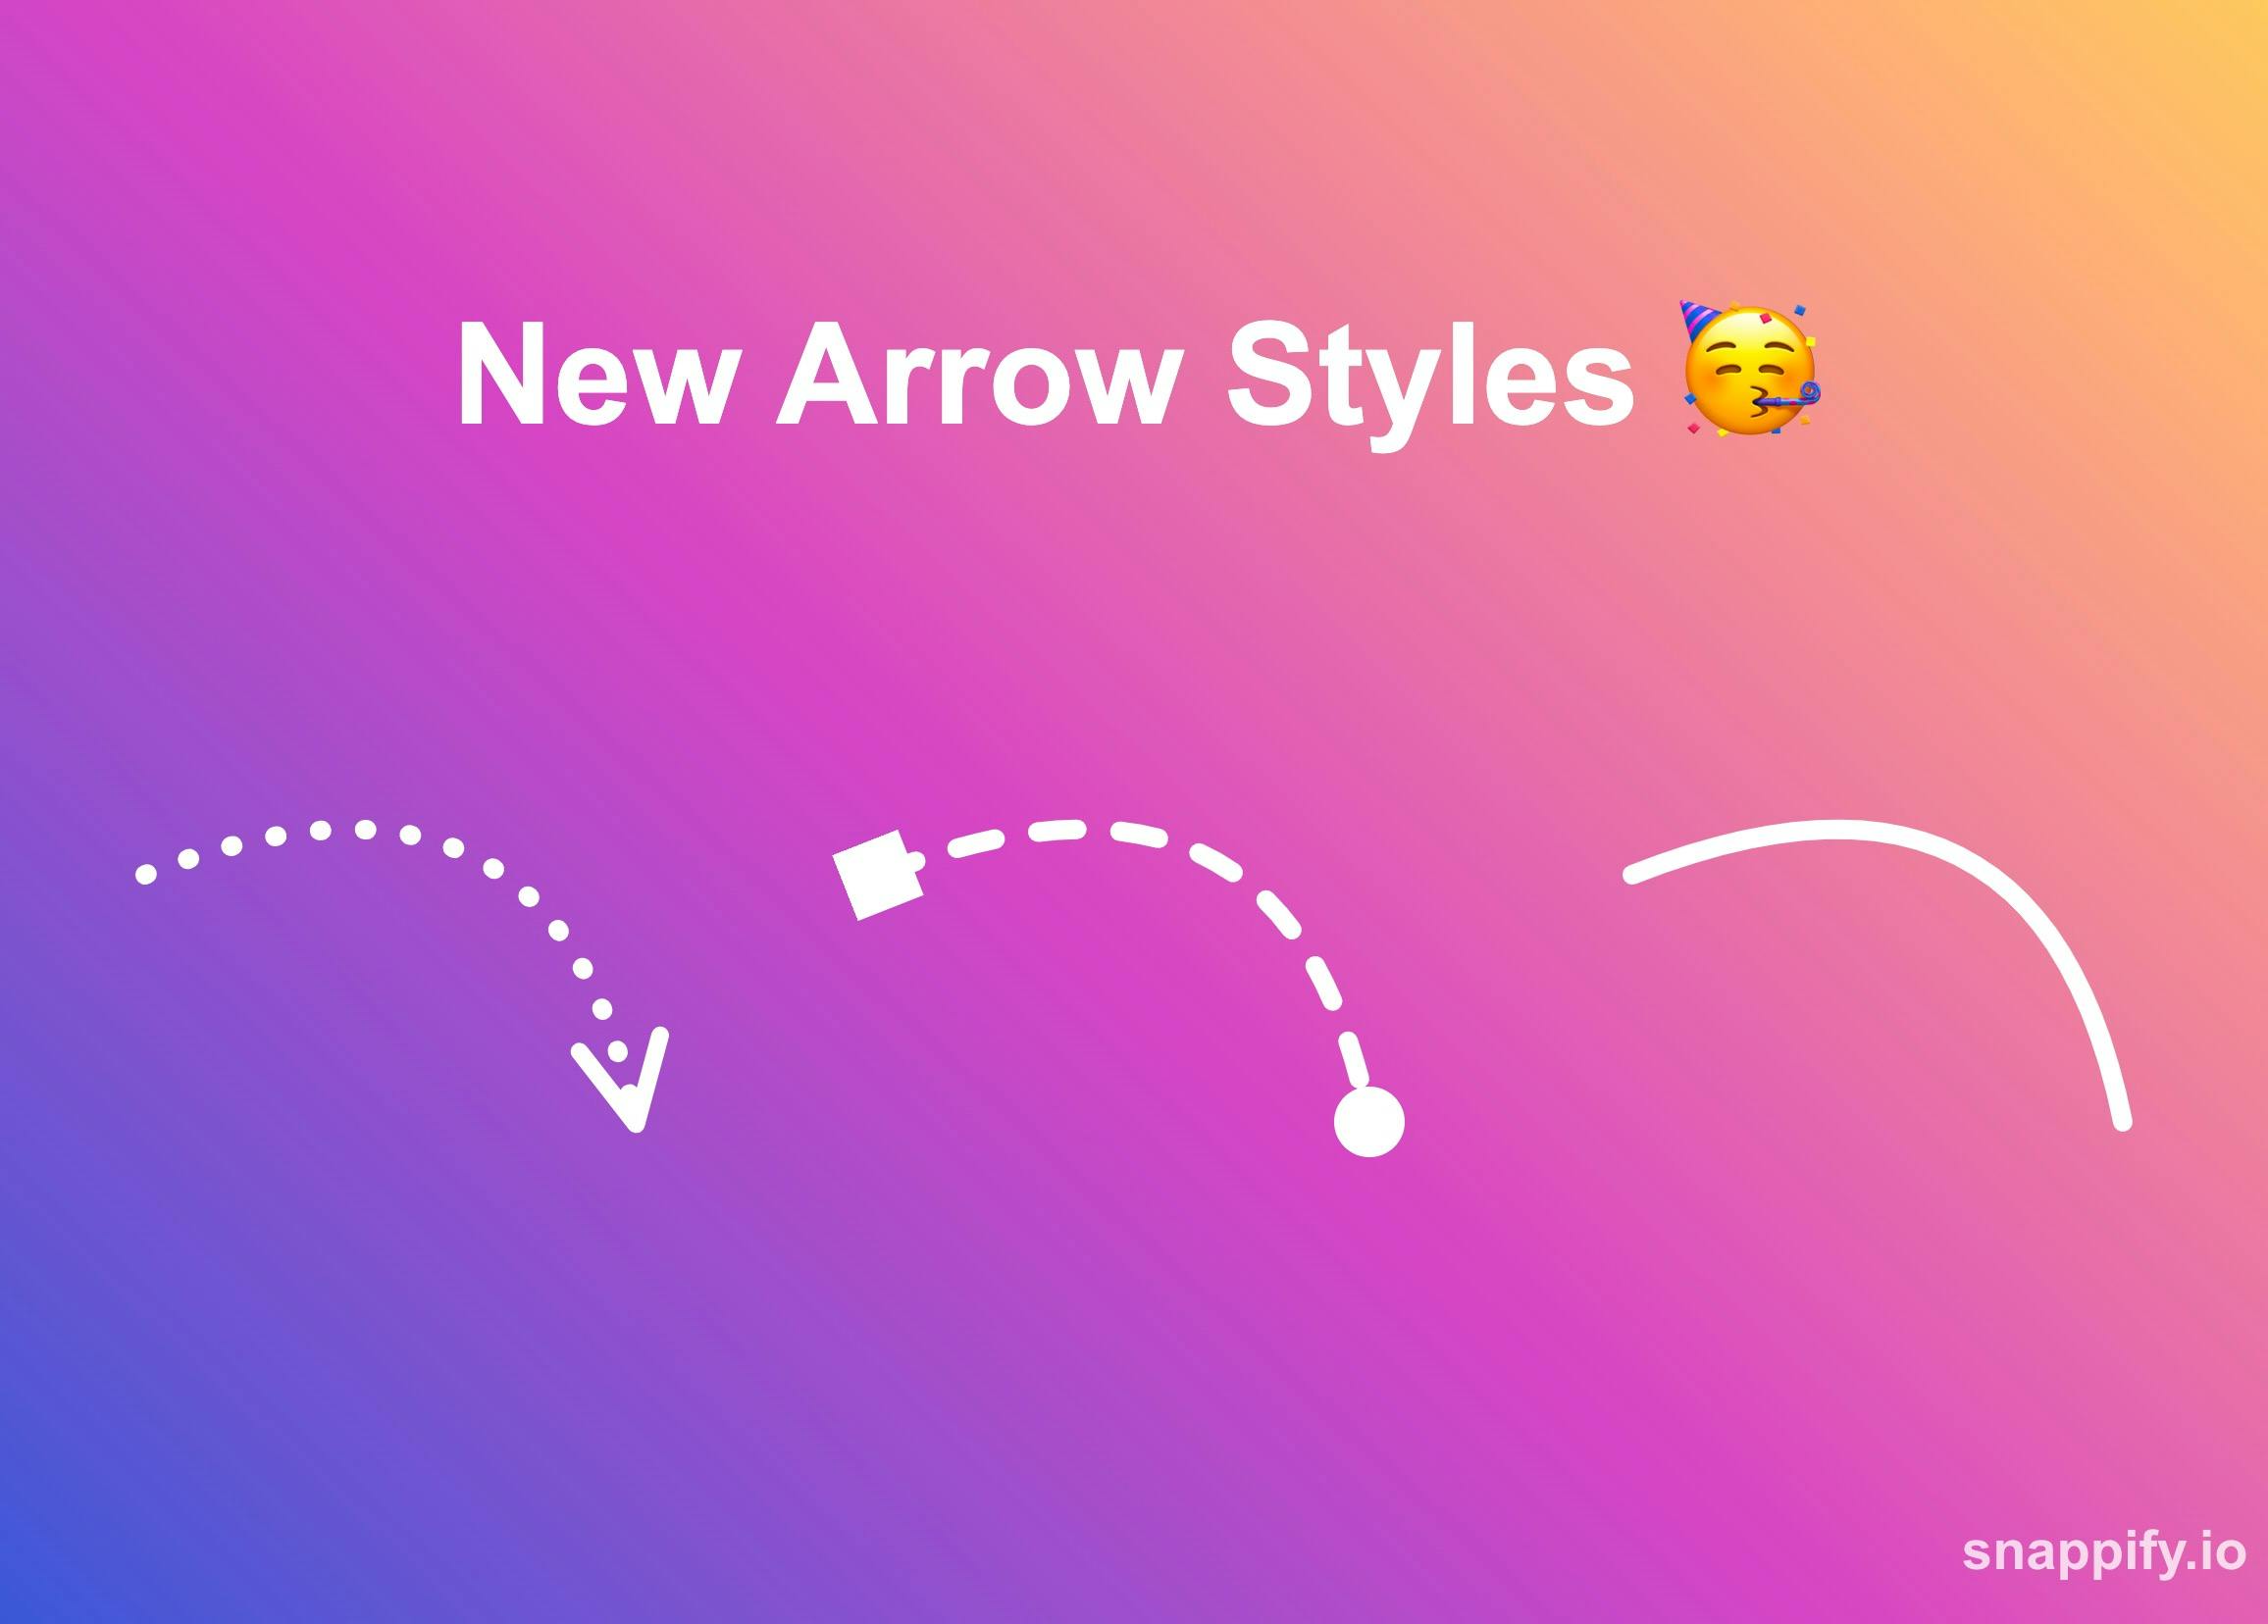 Promotion Image showcasing the new arrow styles